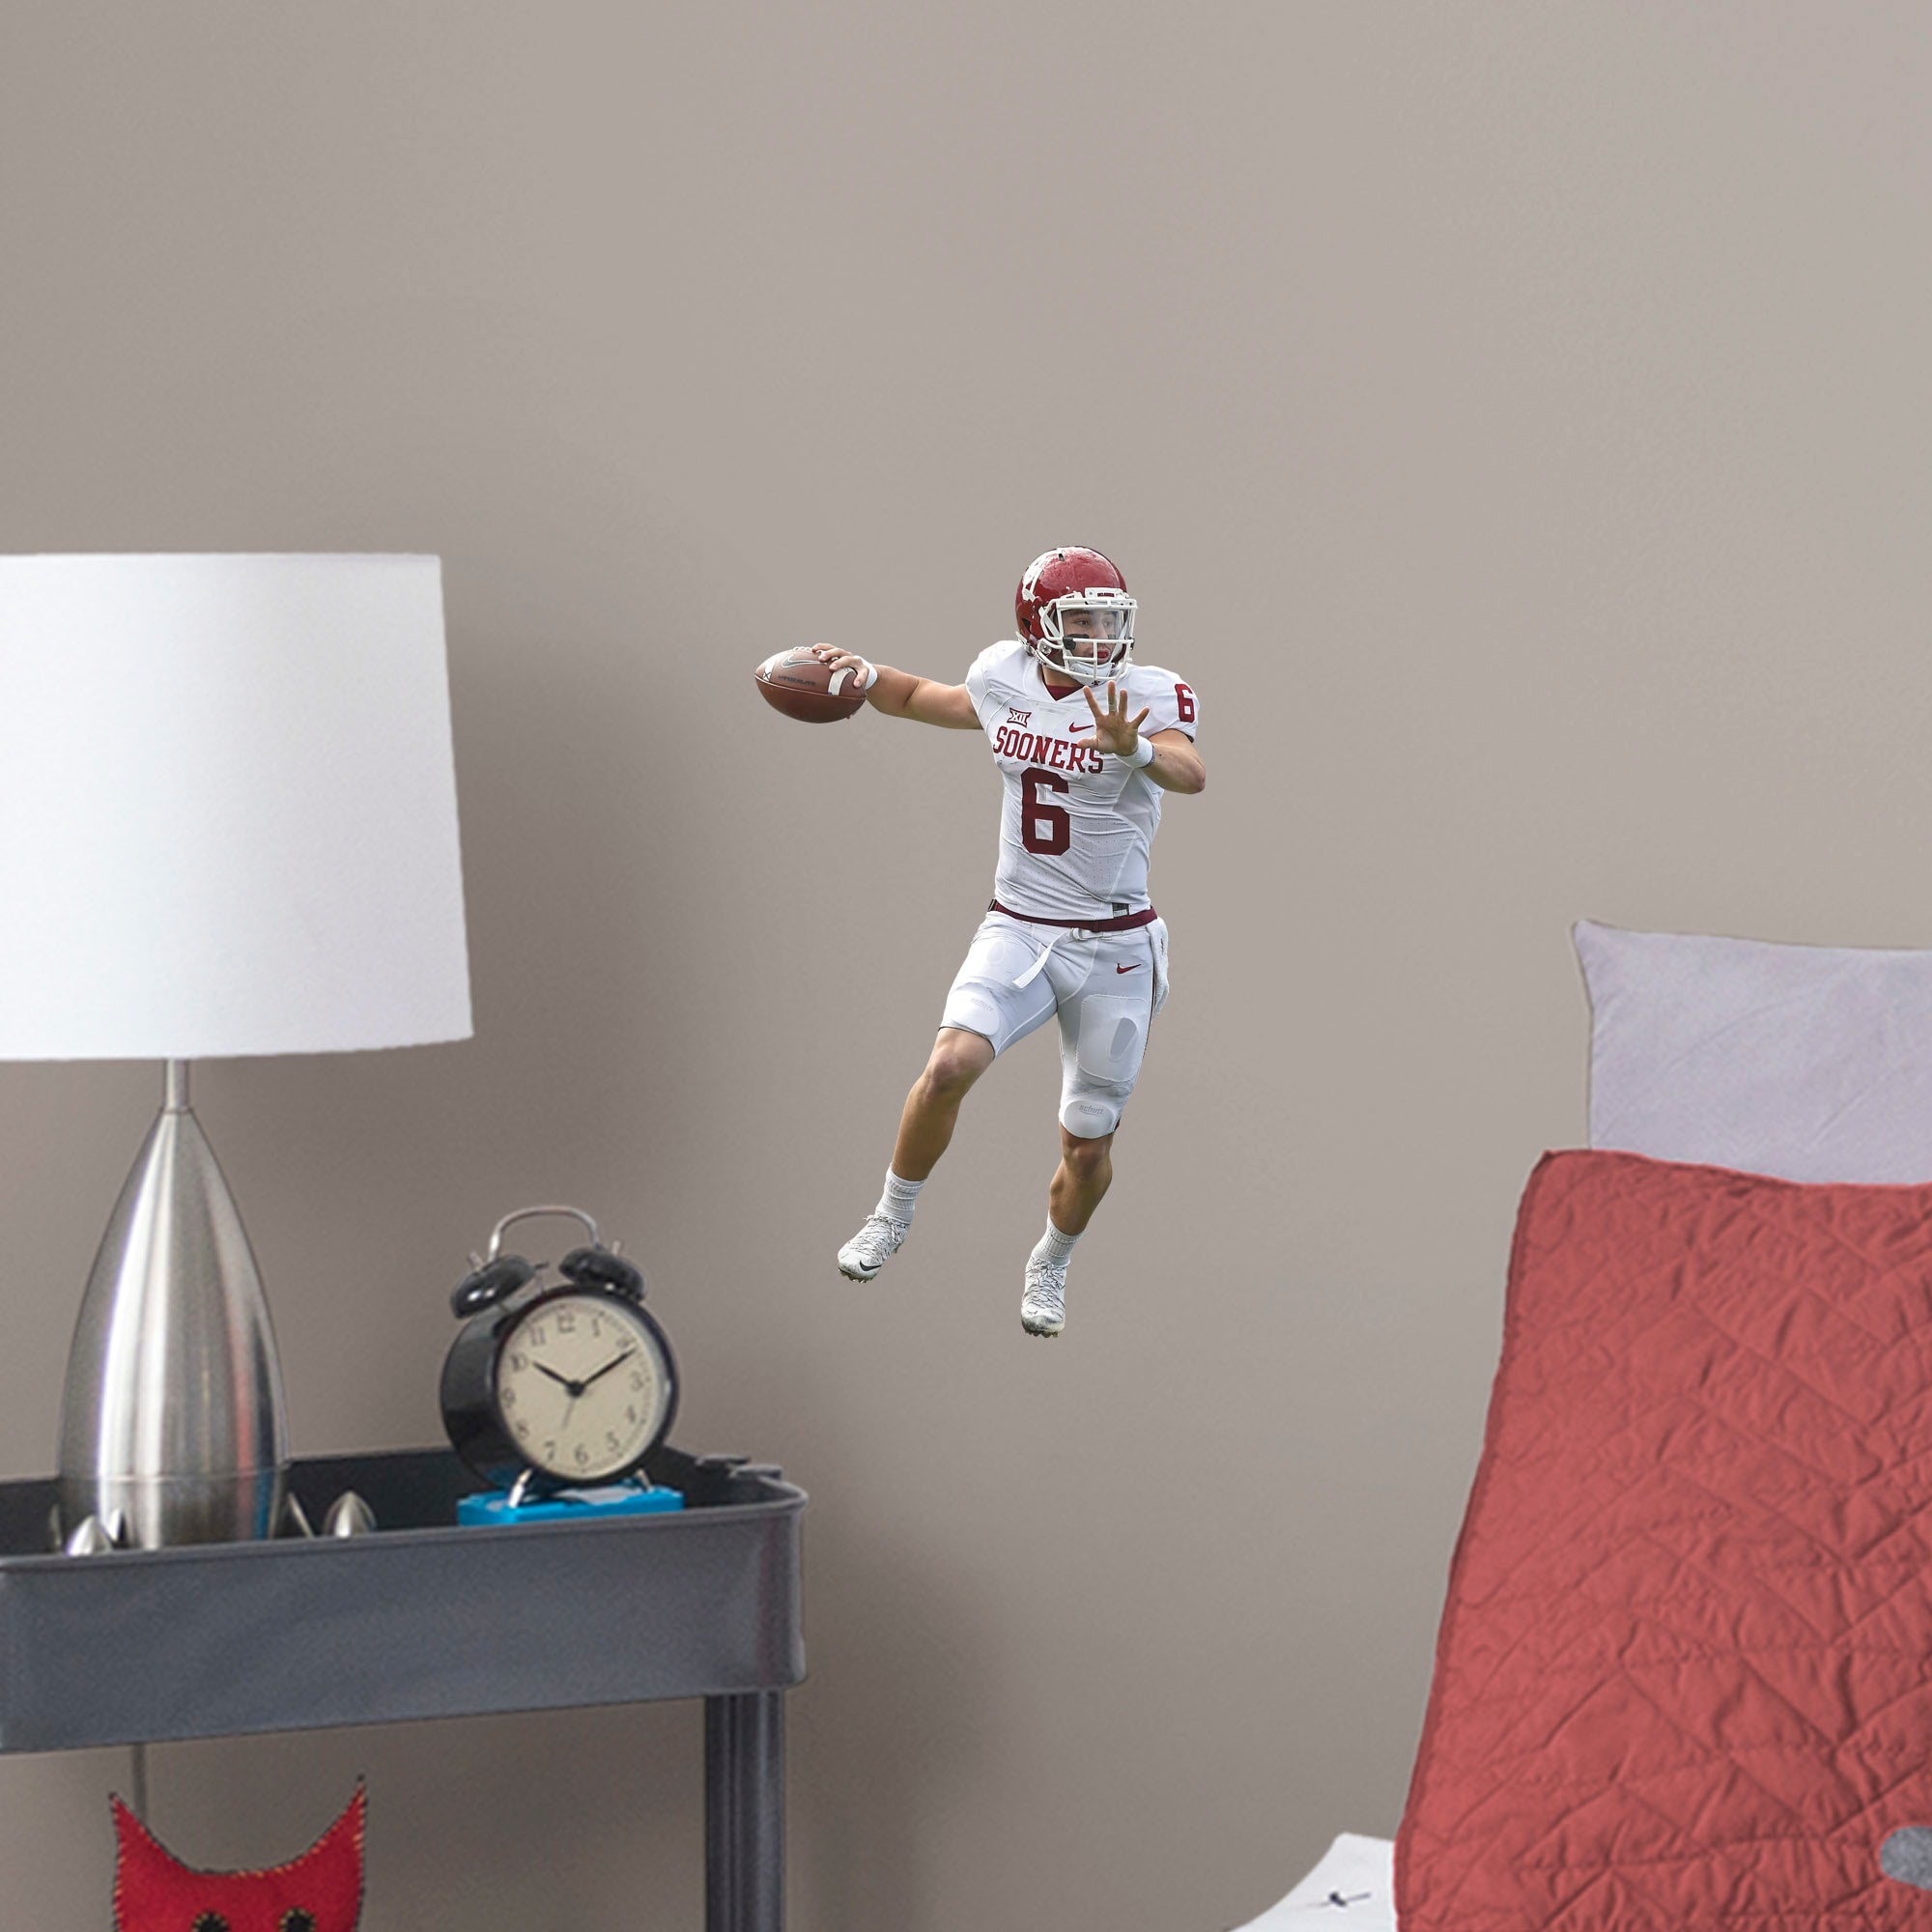 Baker Mayfield for Oklahoma Sooners: Oklahoma - Officially Licensed Removable Wall Decal Large by Fathead | Vinyl